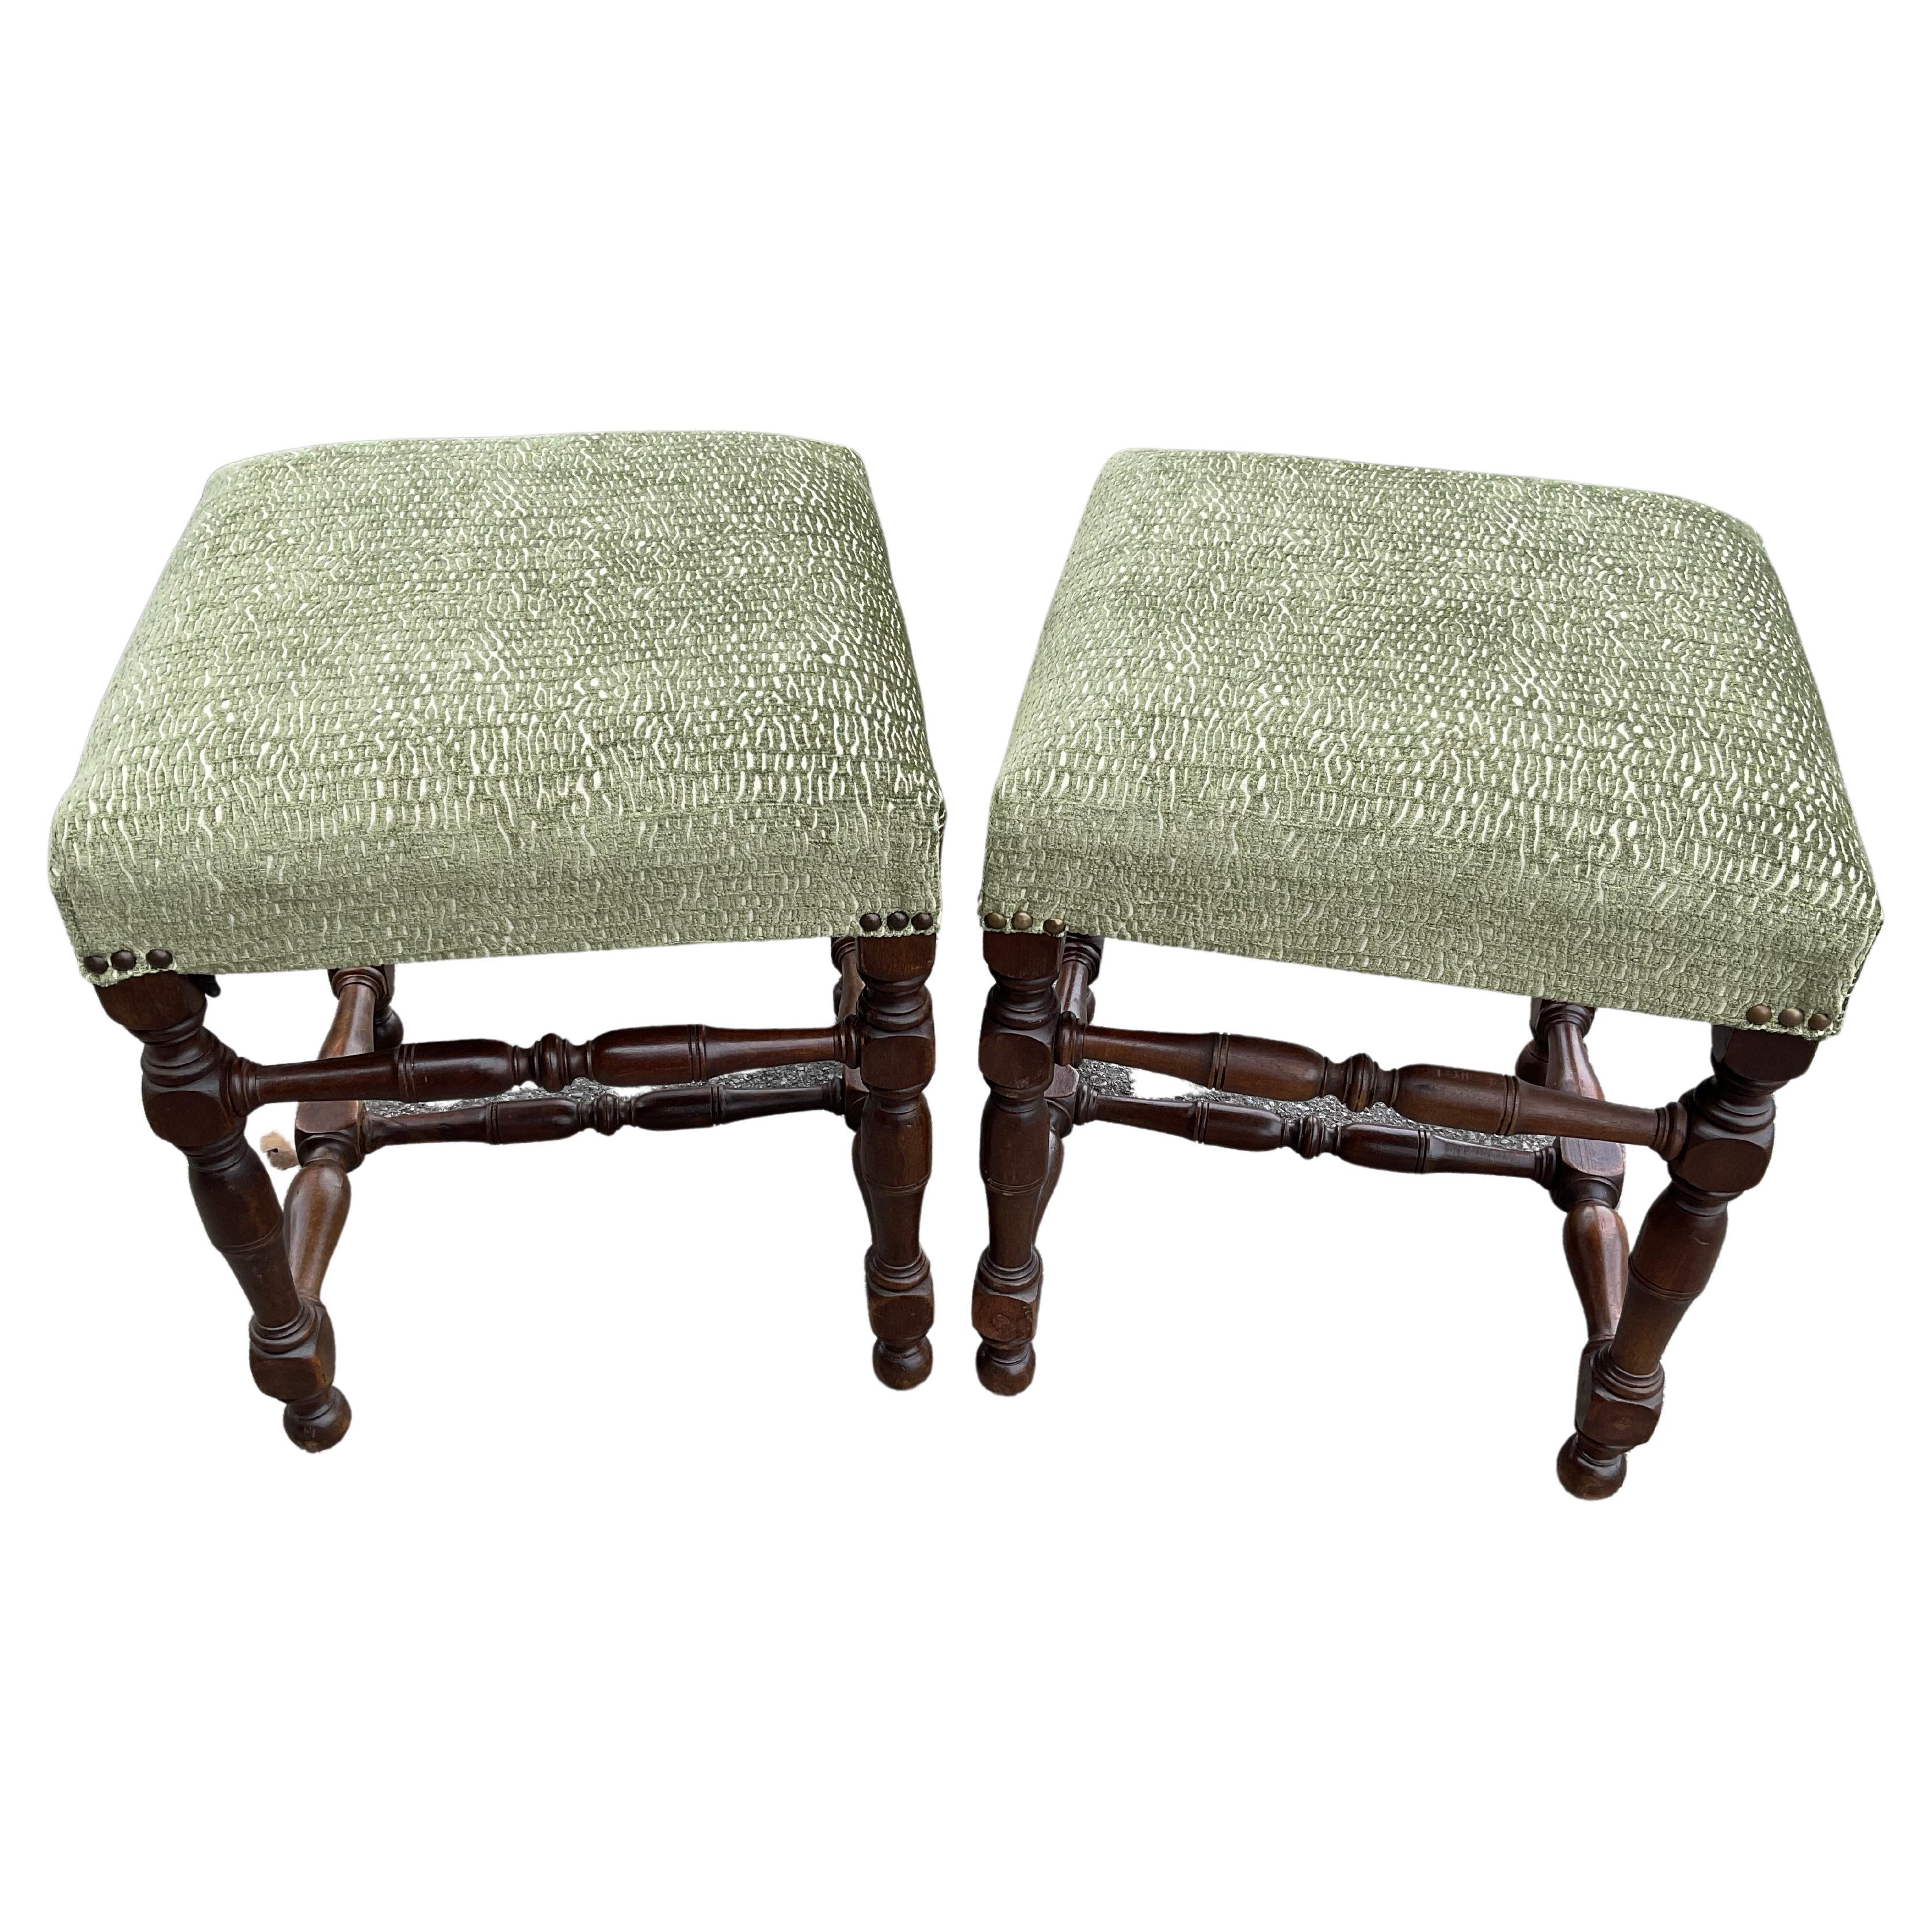 Antique Upholstered Stools 177